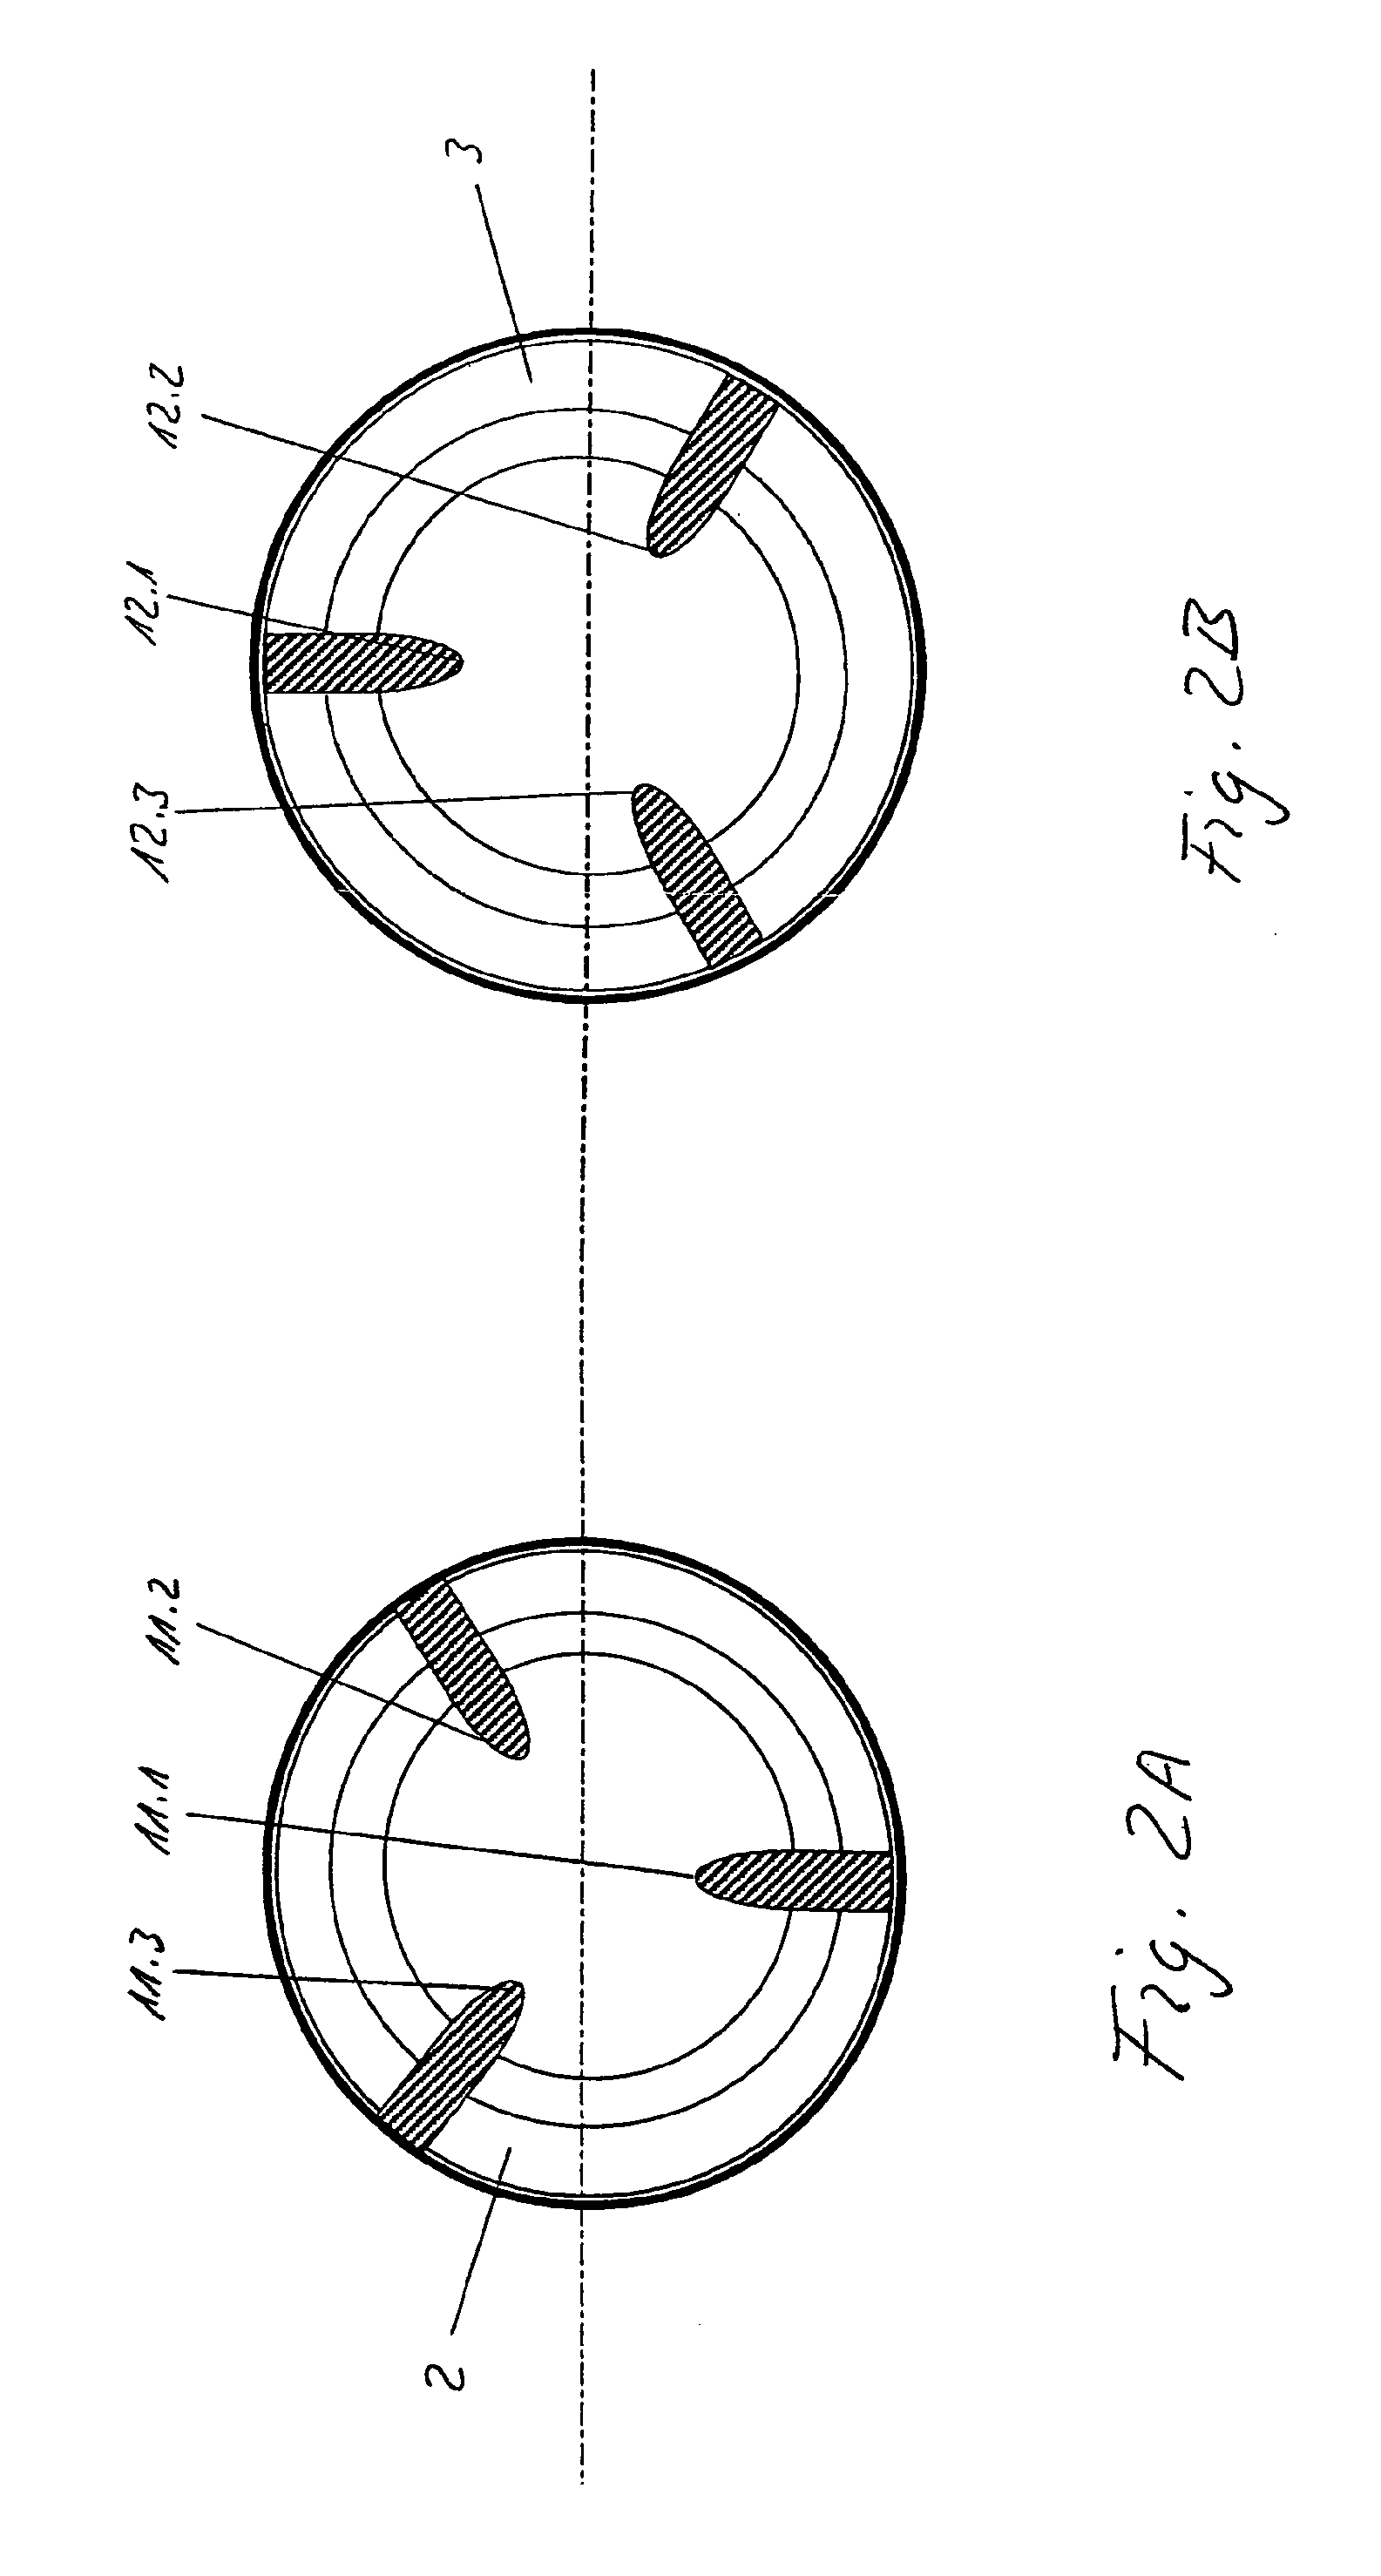 Axial flow pump with a spiral-shaped vane